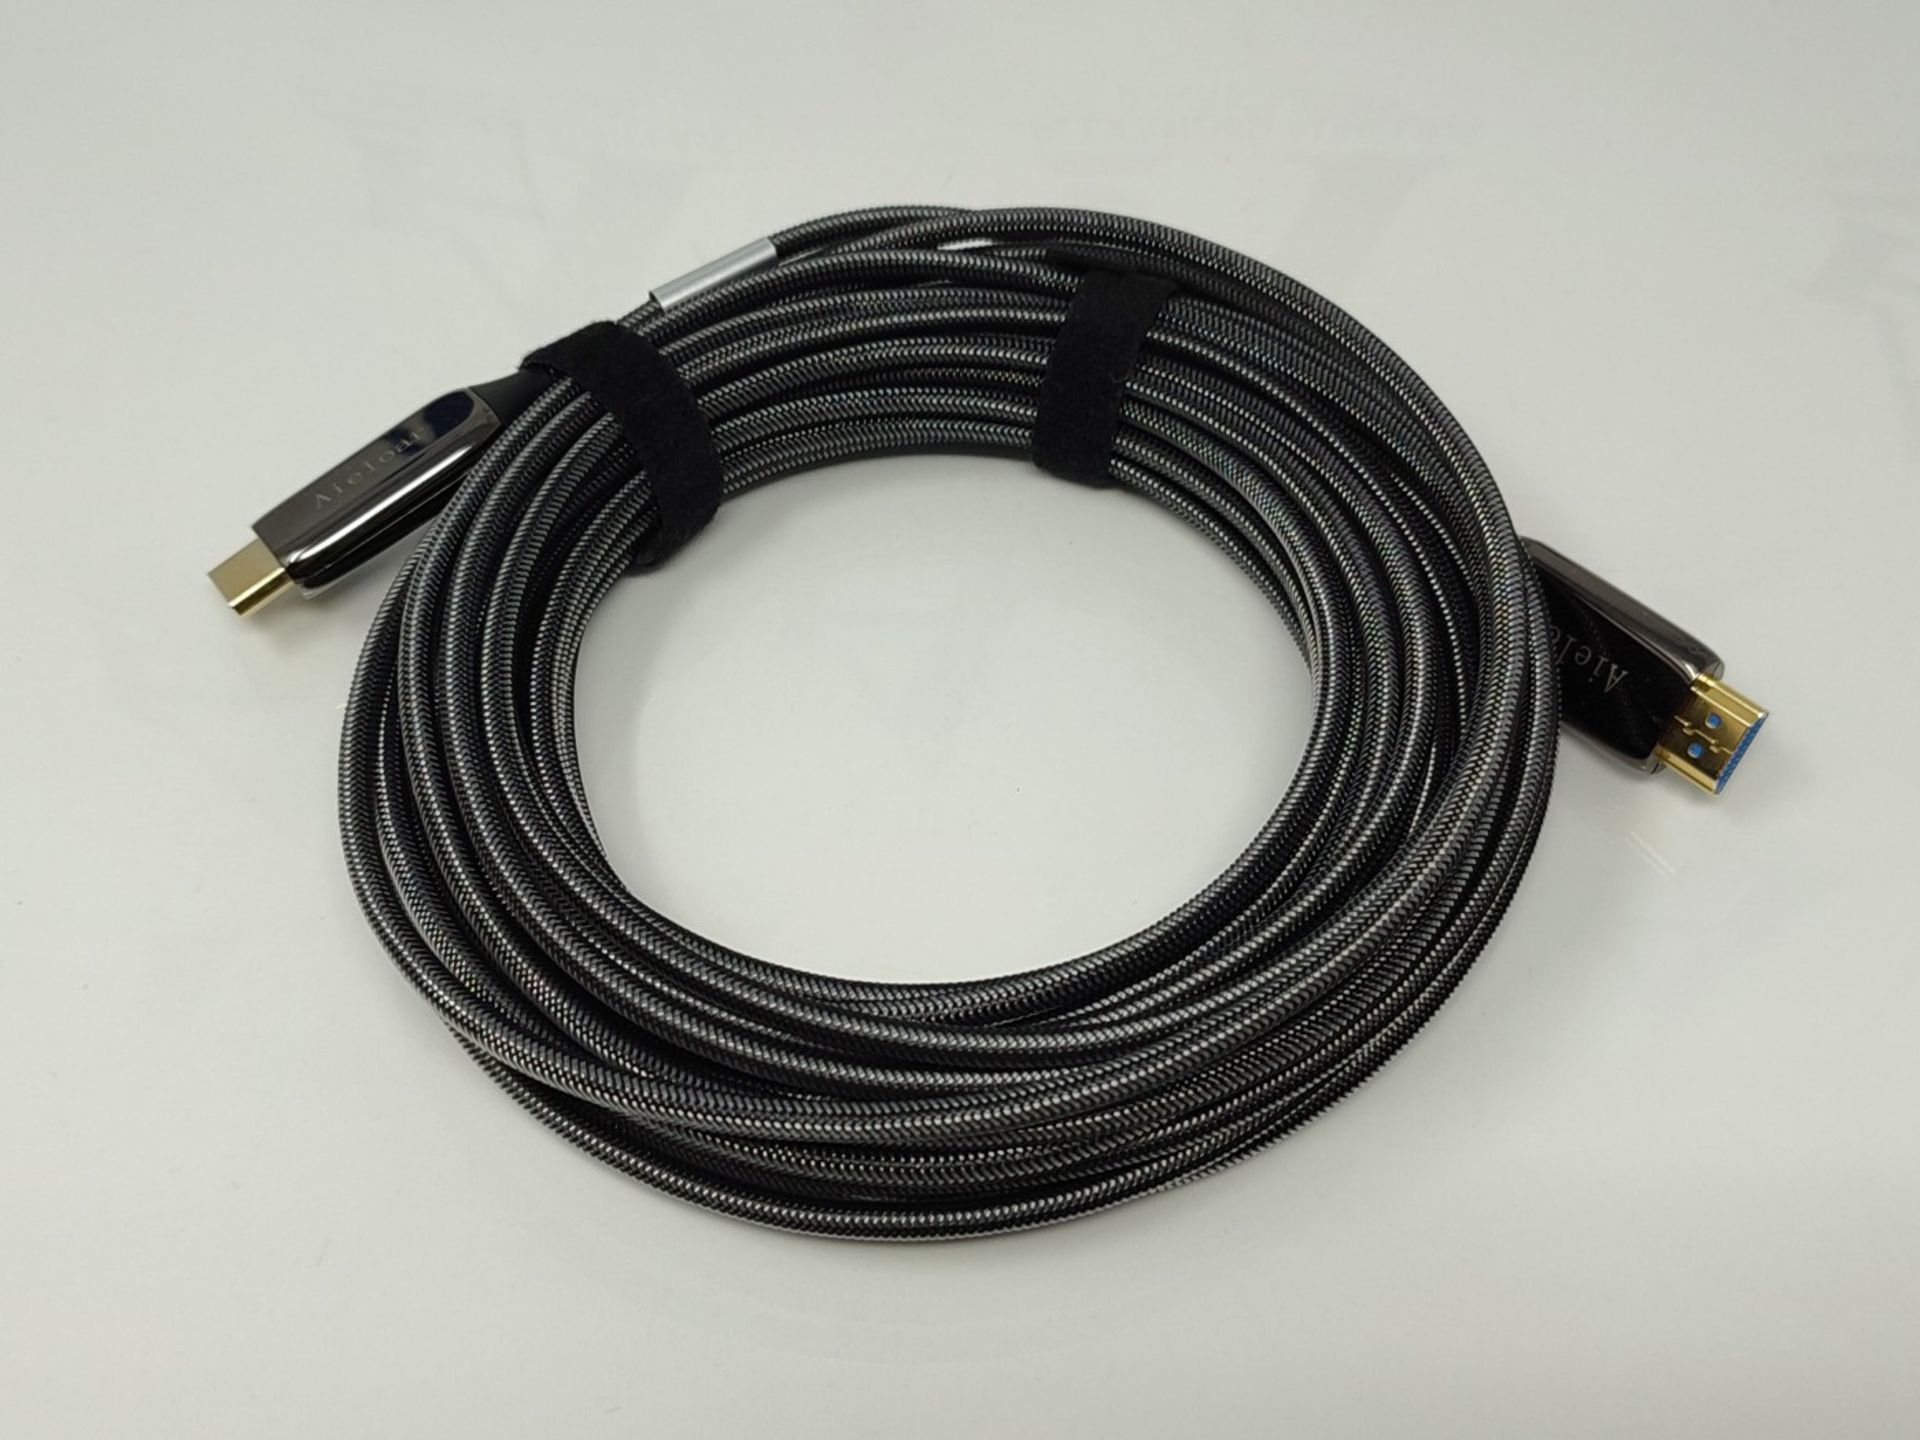 RRP £54.00 Aieloar Fiber Optic HDMI Cable 10m,HDMI 2.1 Cable Support High Speed 48Gbps,8K@60Hz,4K - Image 2 of 3